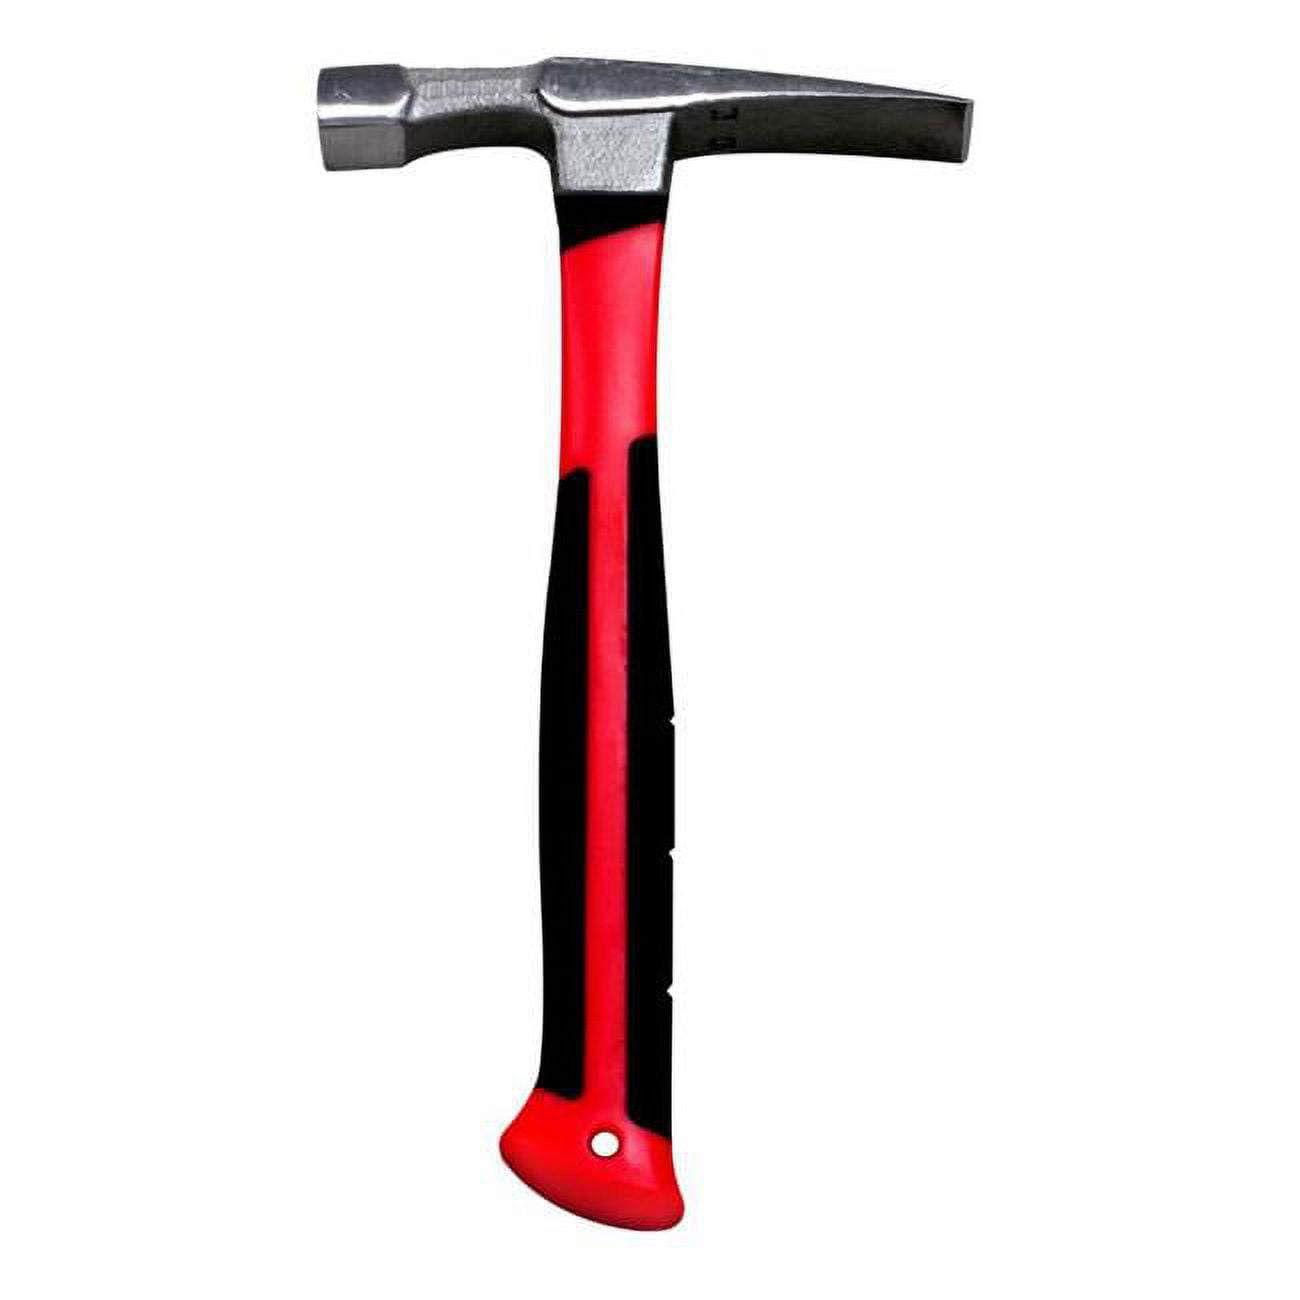 Picture of Allied 31300 16 oz Brick Hammer with Fiberglass Handle